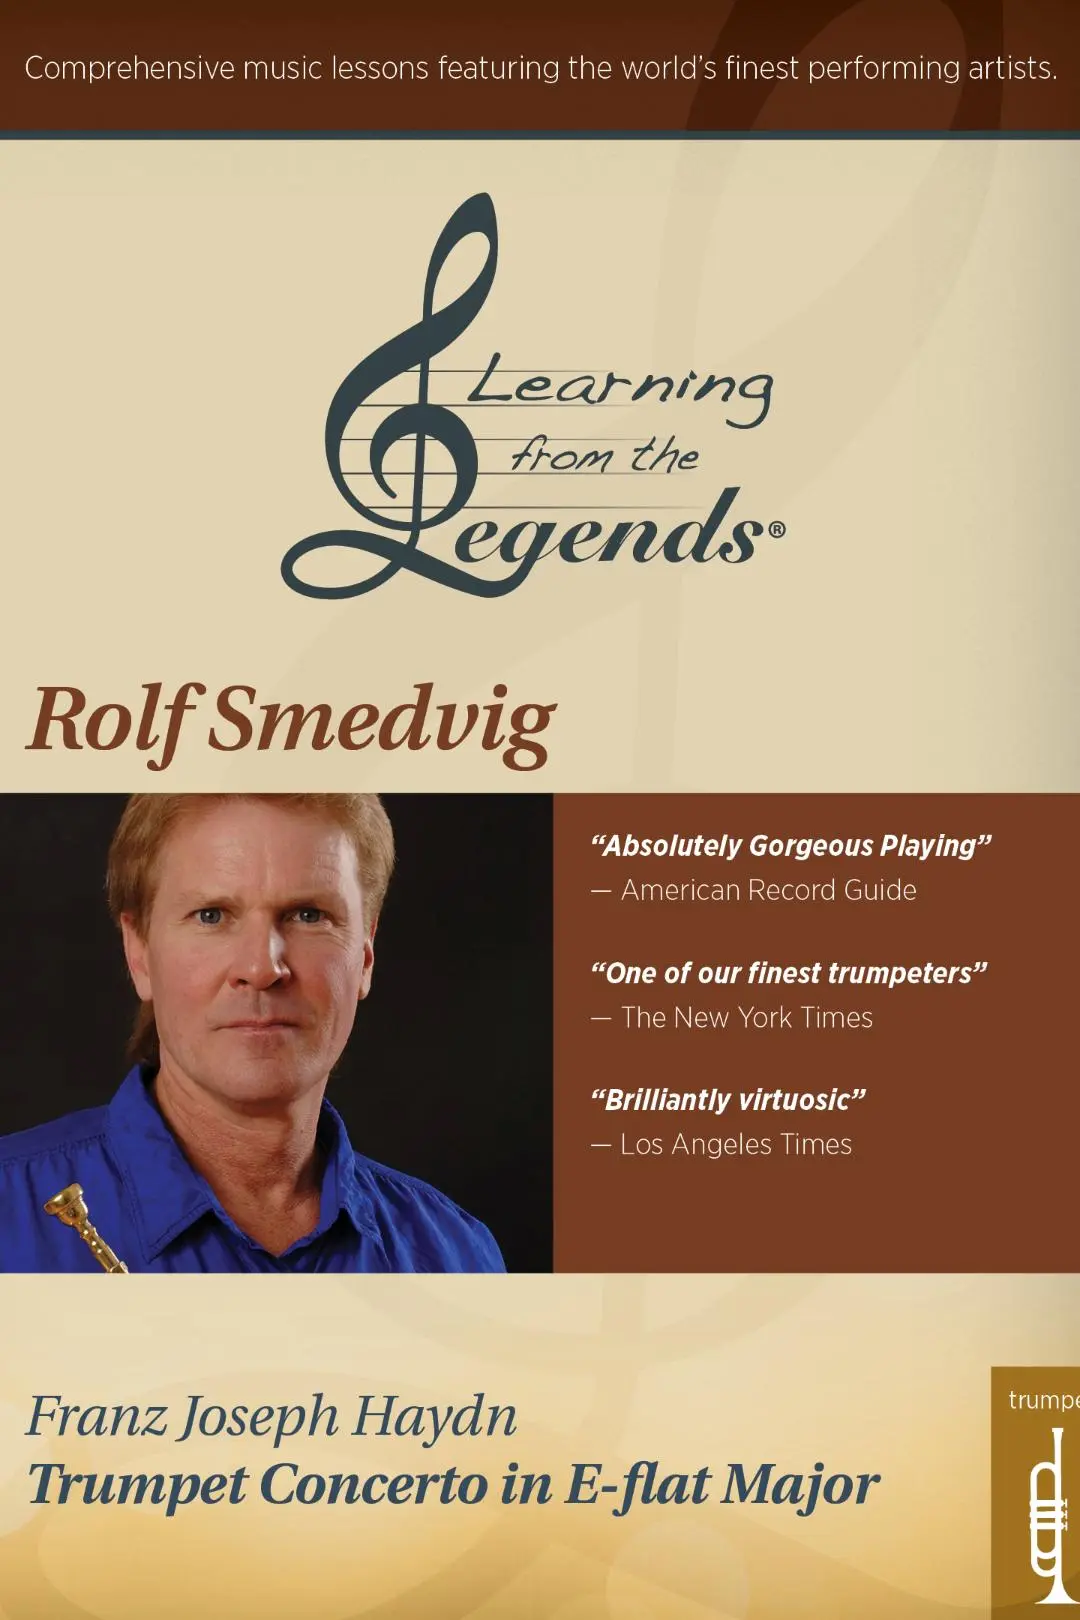 Learning from the Legends: Haydn Trumpet Concerto in E-flat Major Featuring Rolf Smedvig_peliplat